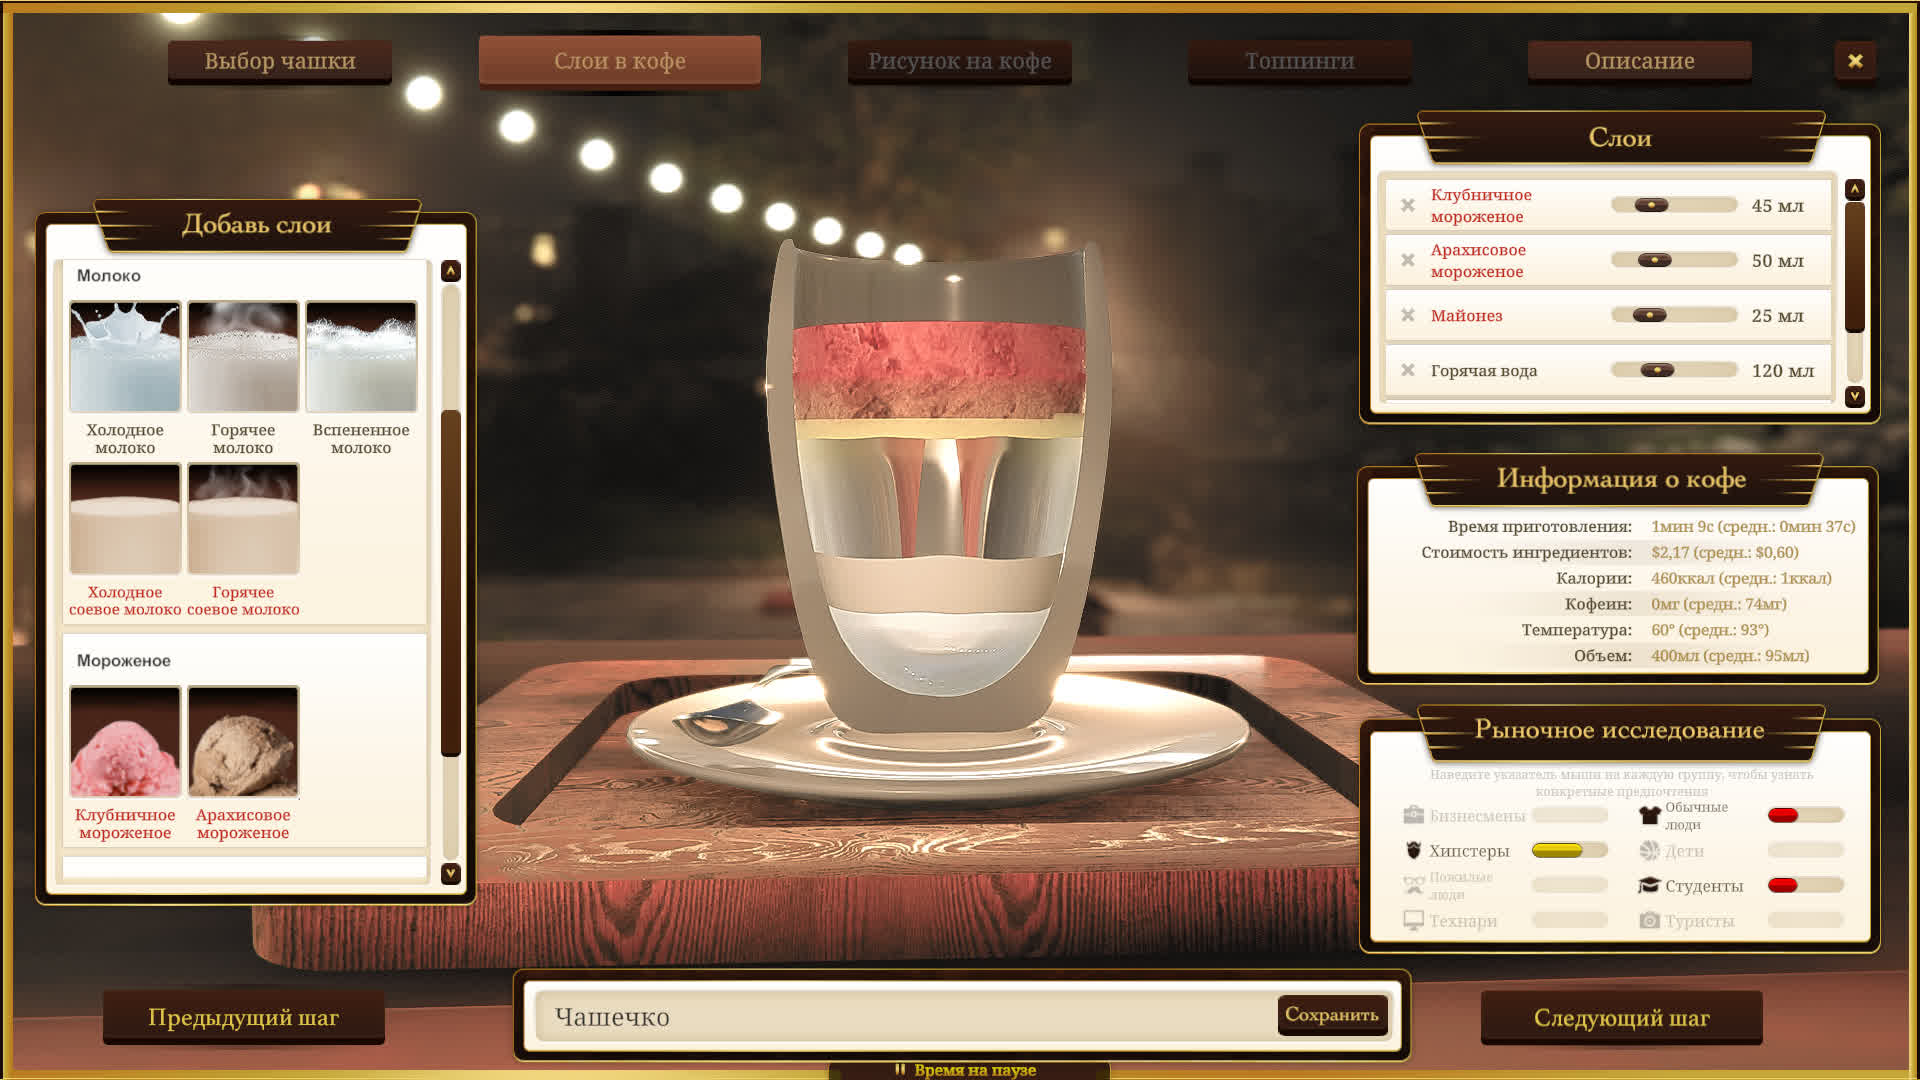 Espresso Tycoon review